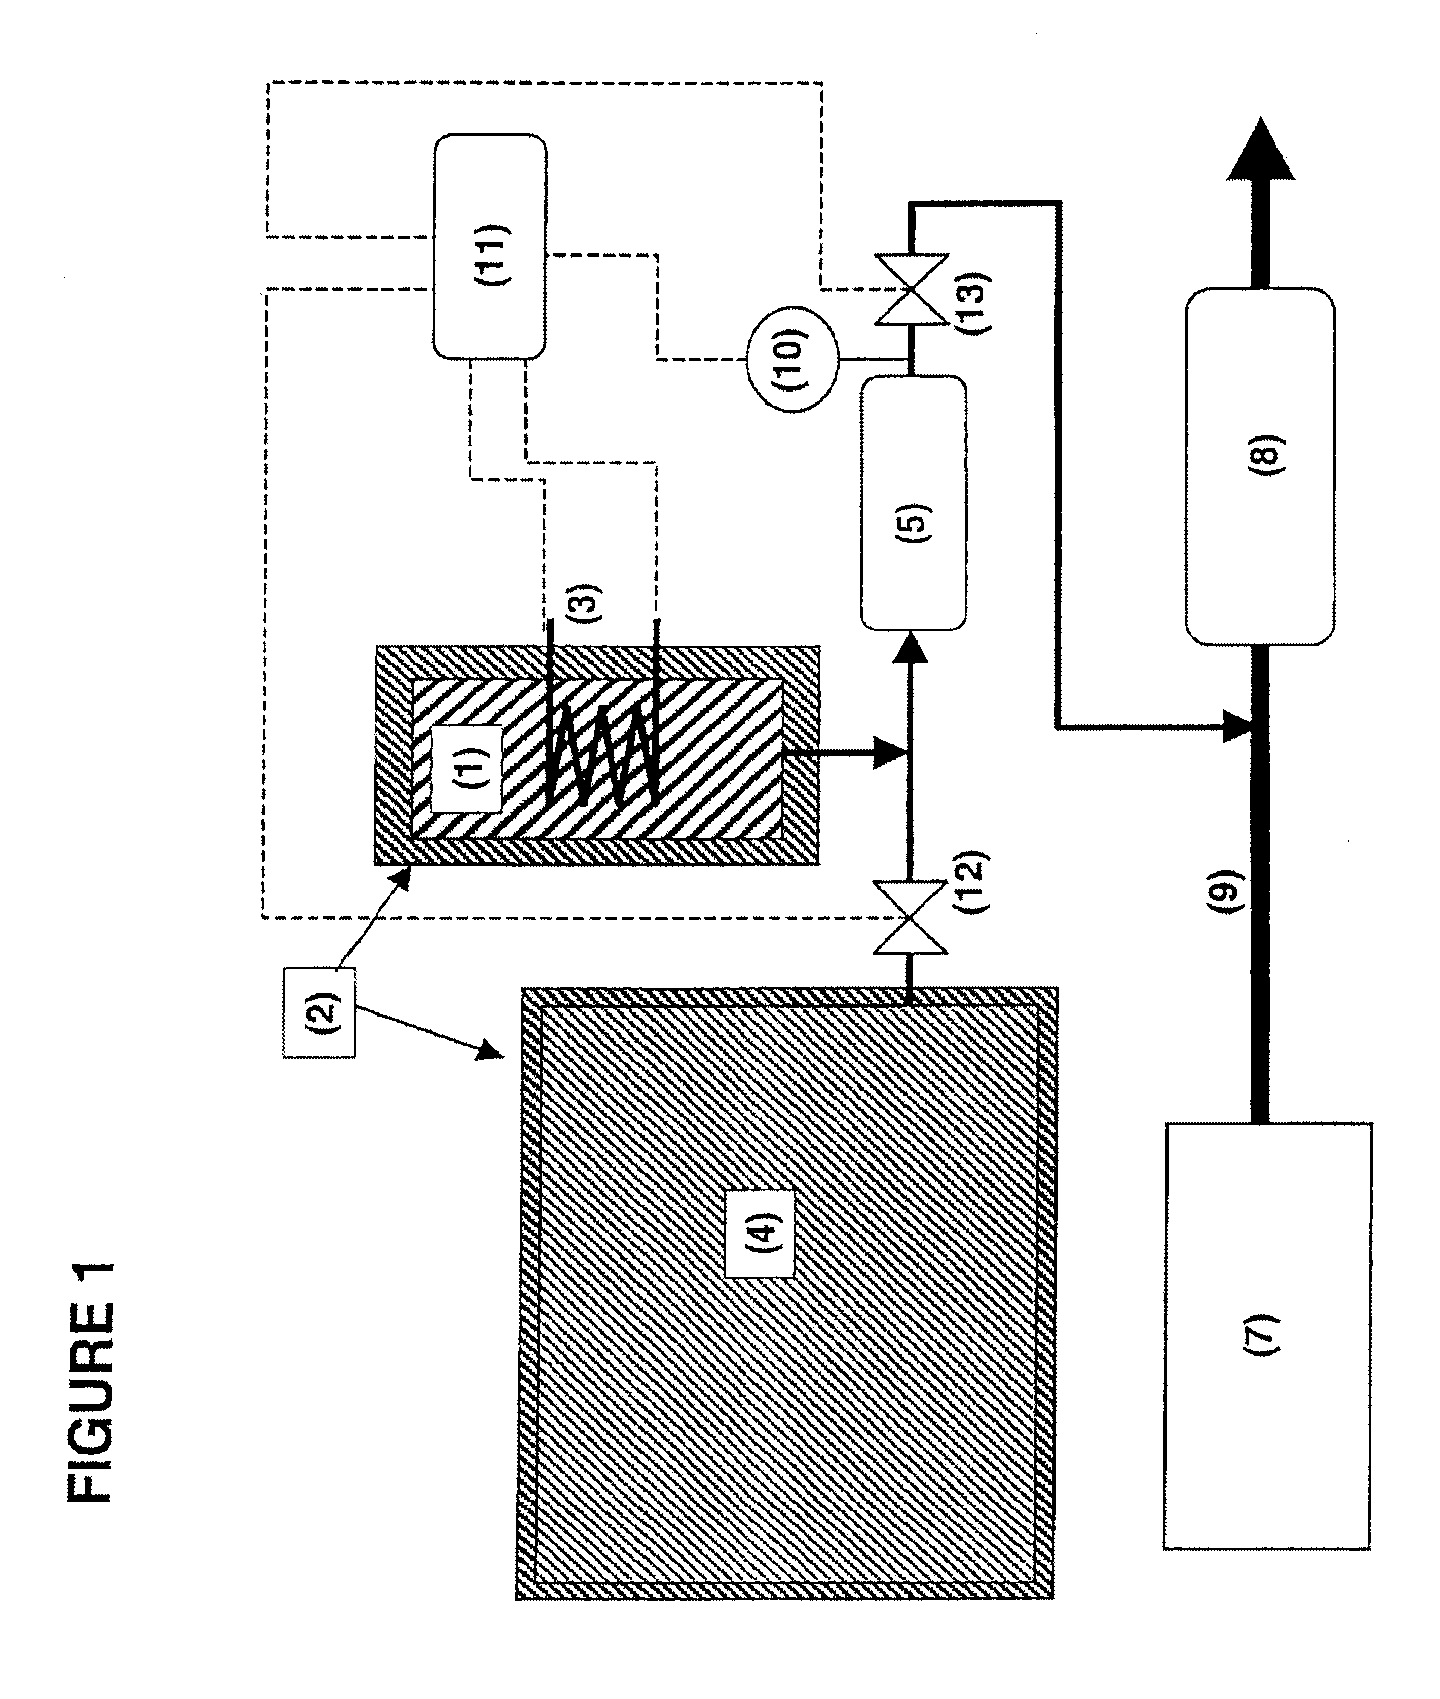 Method and device for ammonia storage and delivery using in situ re-saturation of a delivery unit